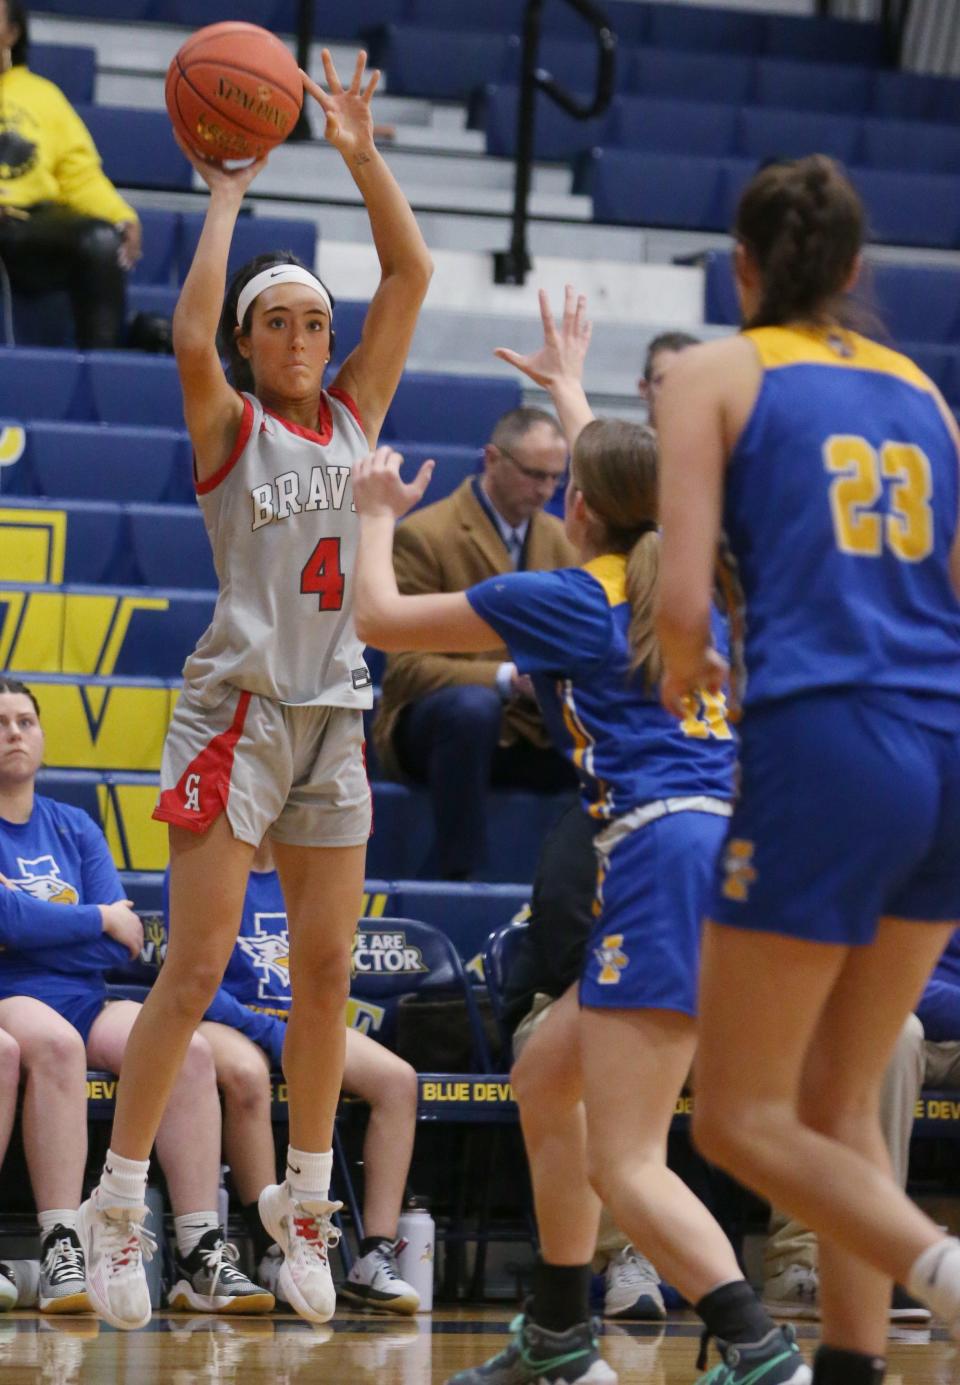 Mya Herman and her Canandaigua teammates are in the Class A state tournament final four after winning the Section V Class A Championship.